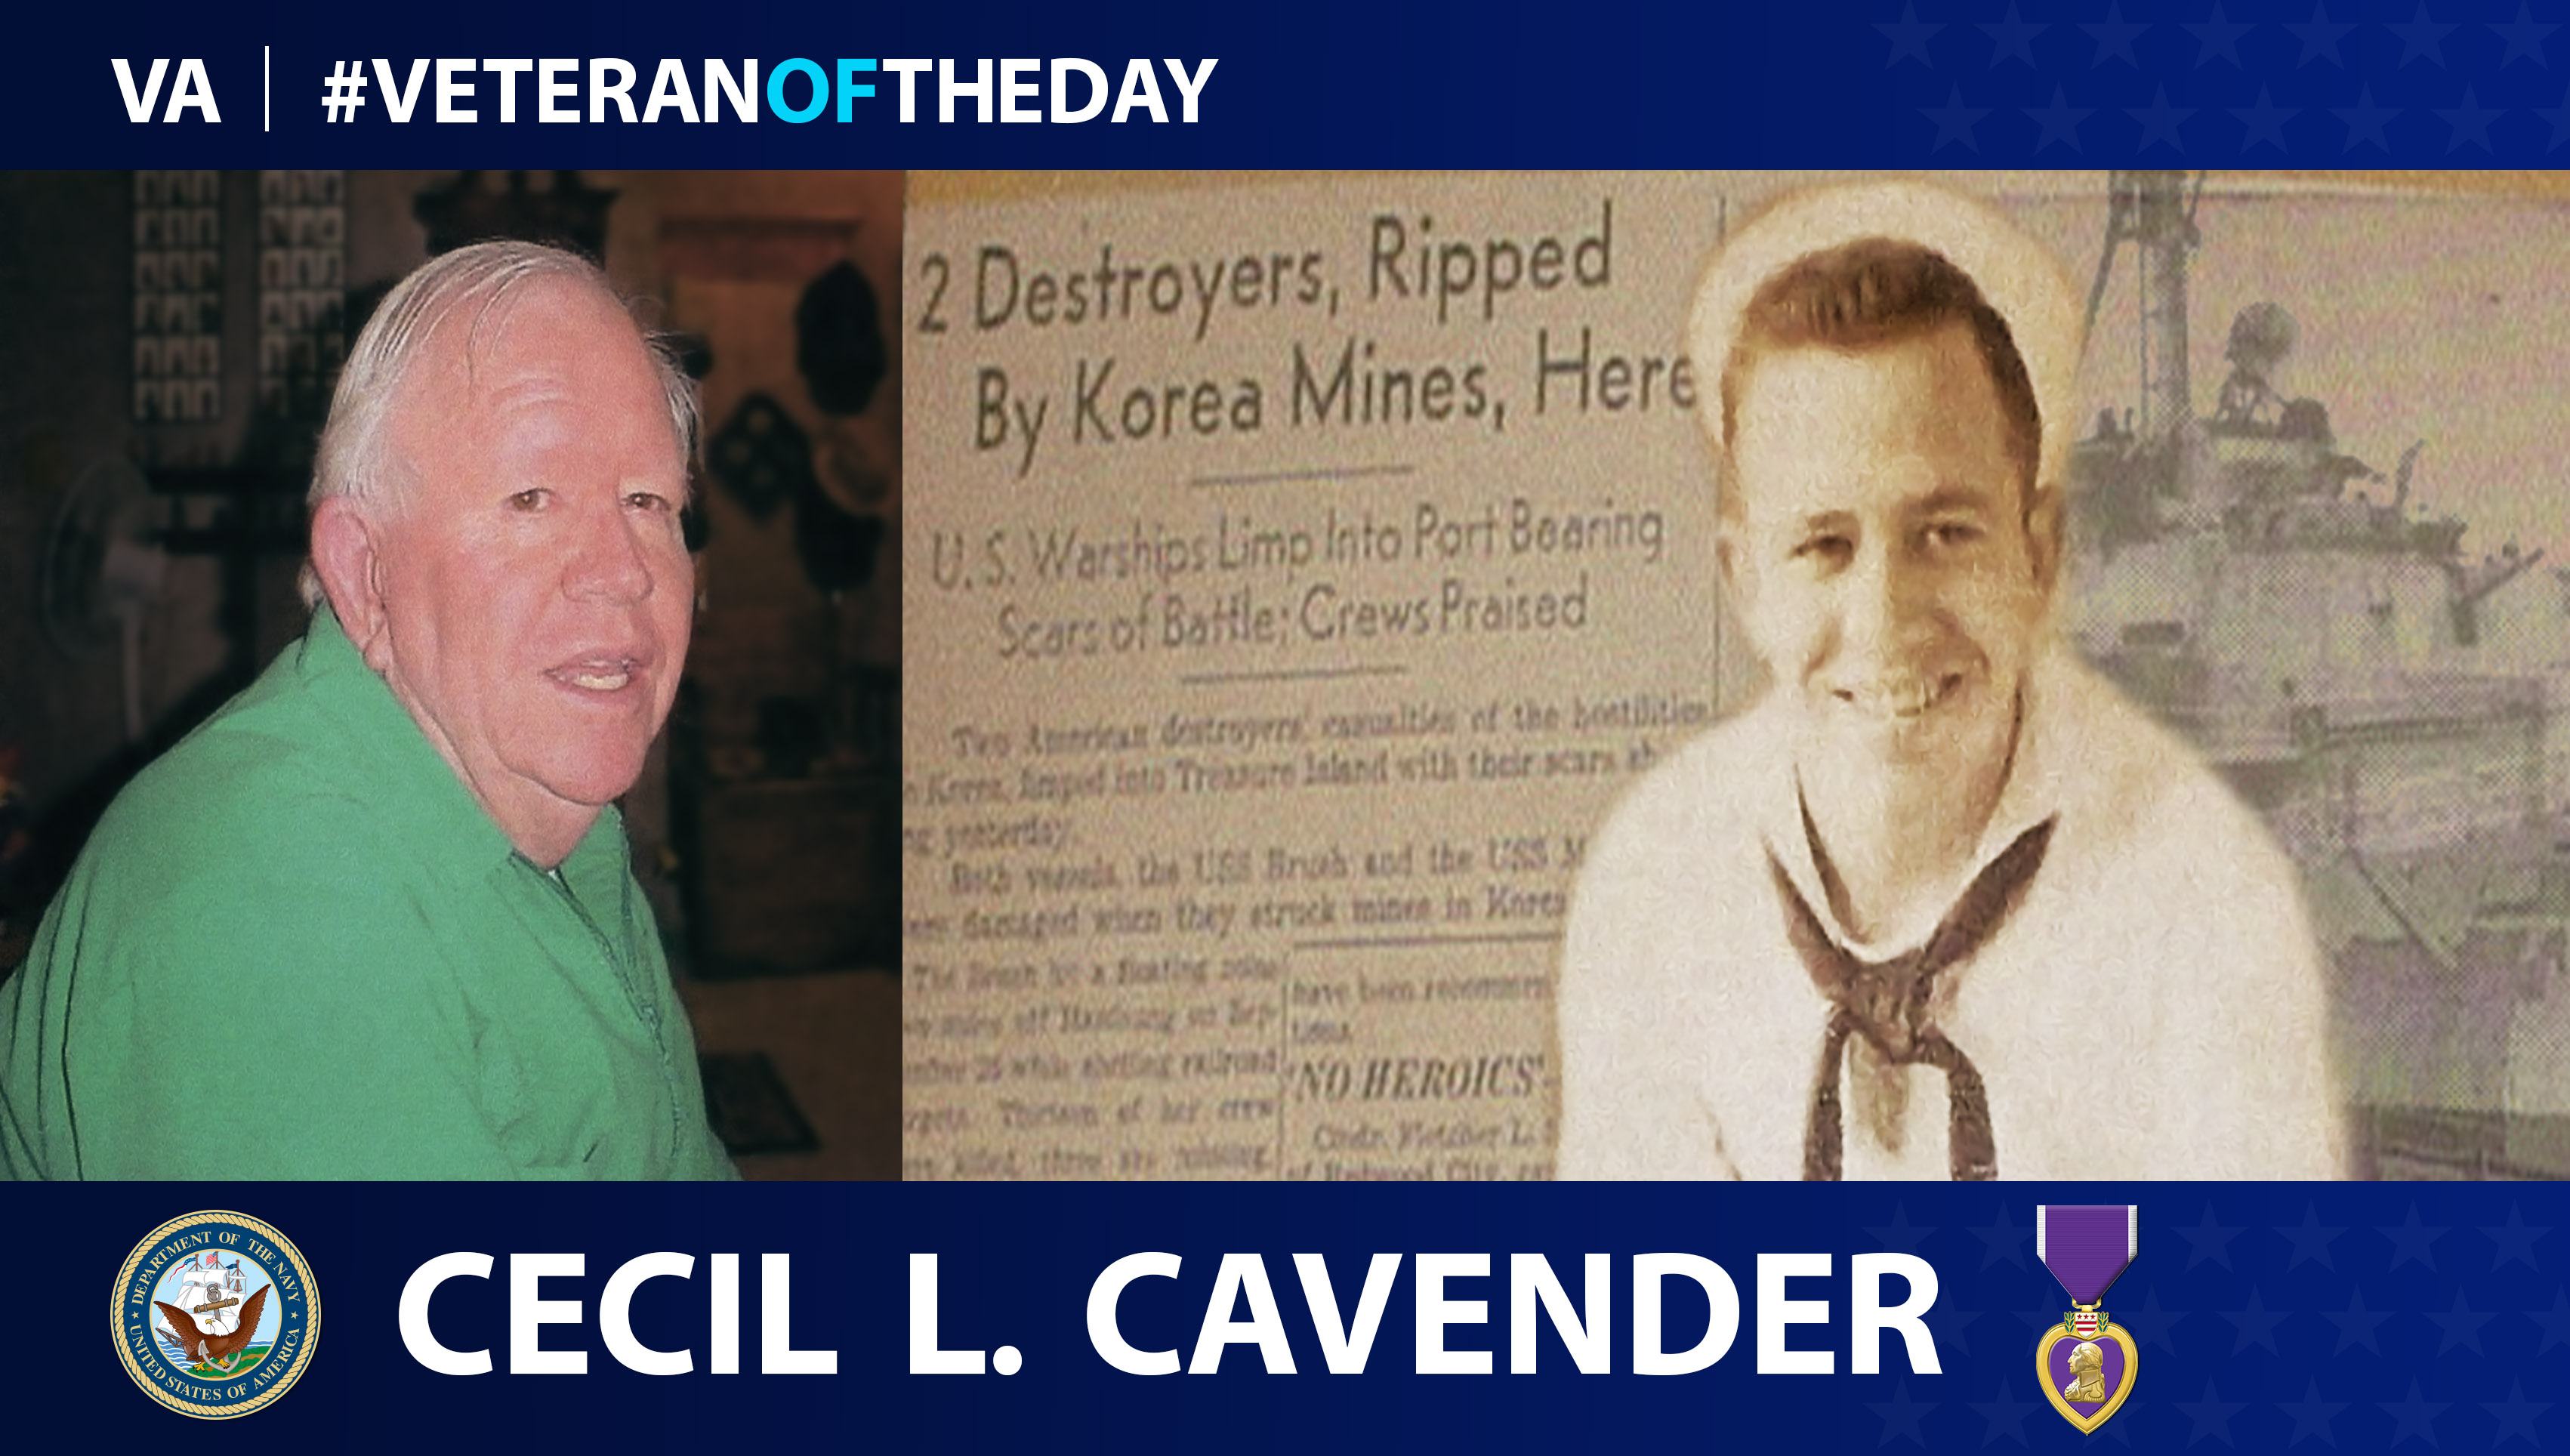 Cecil Cavender is today's Veteran of the Day.